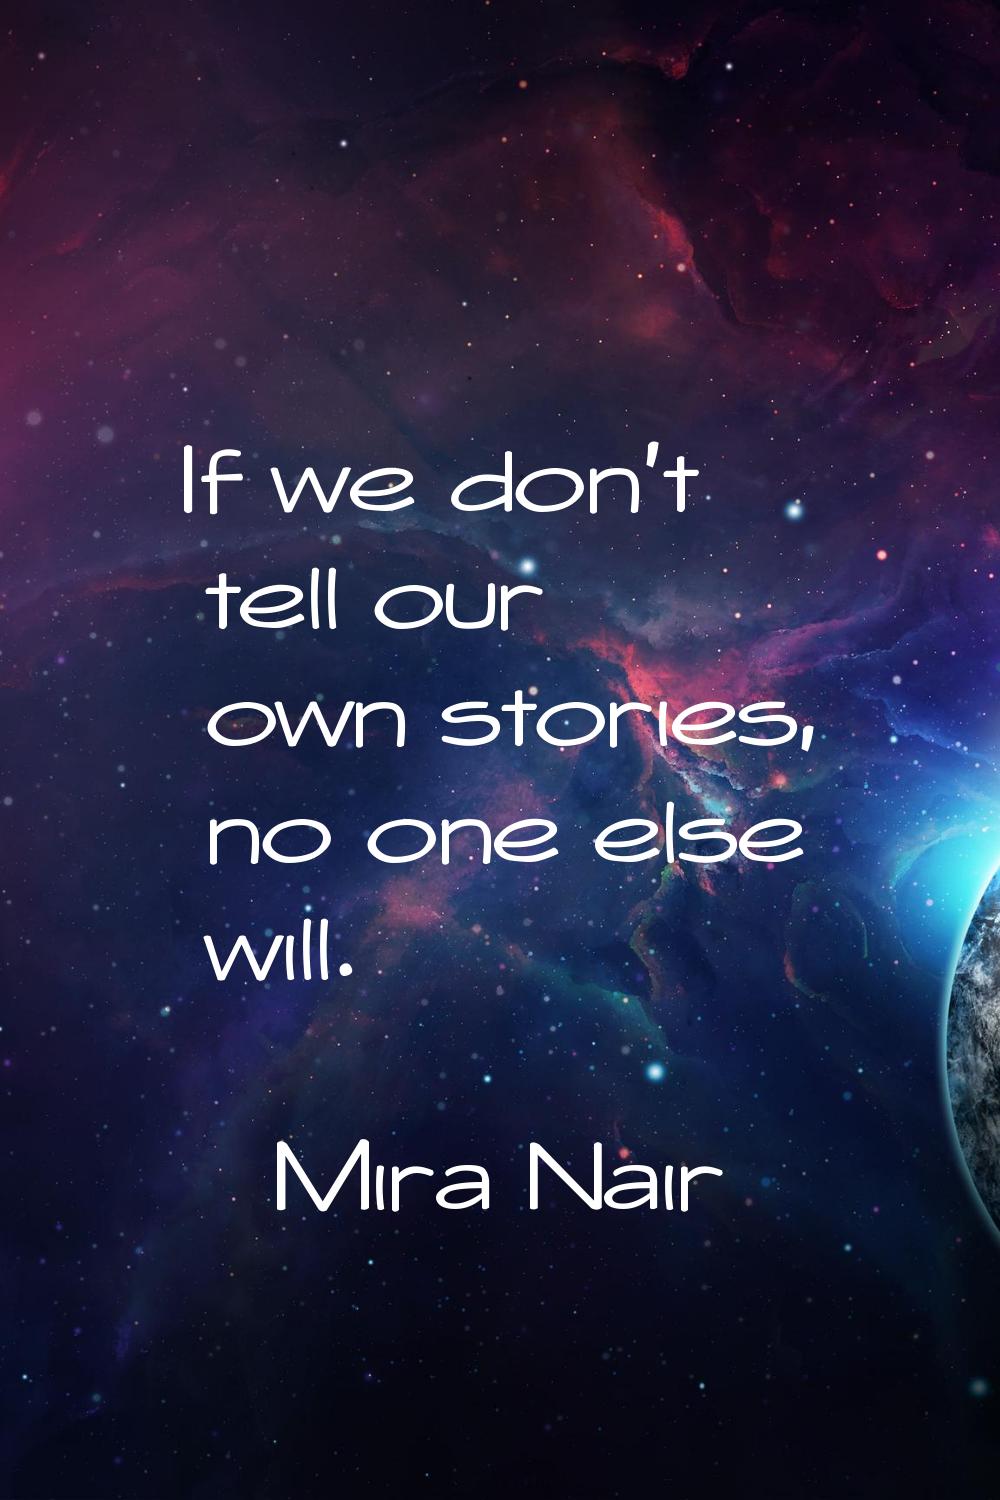 If we don't tell our own stories, no one else will.